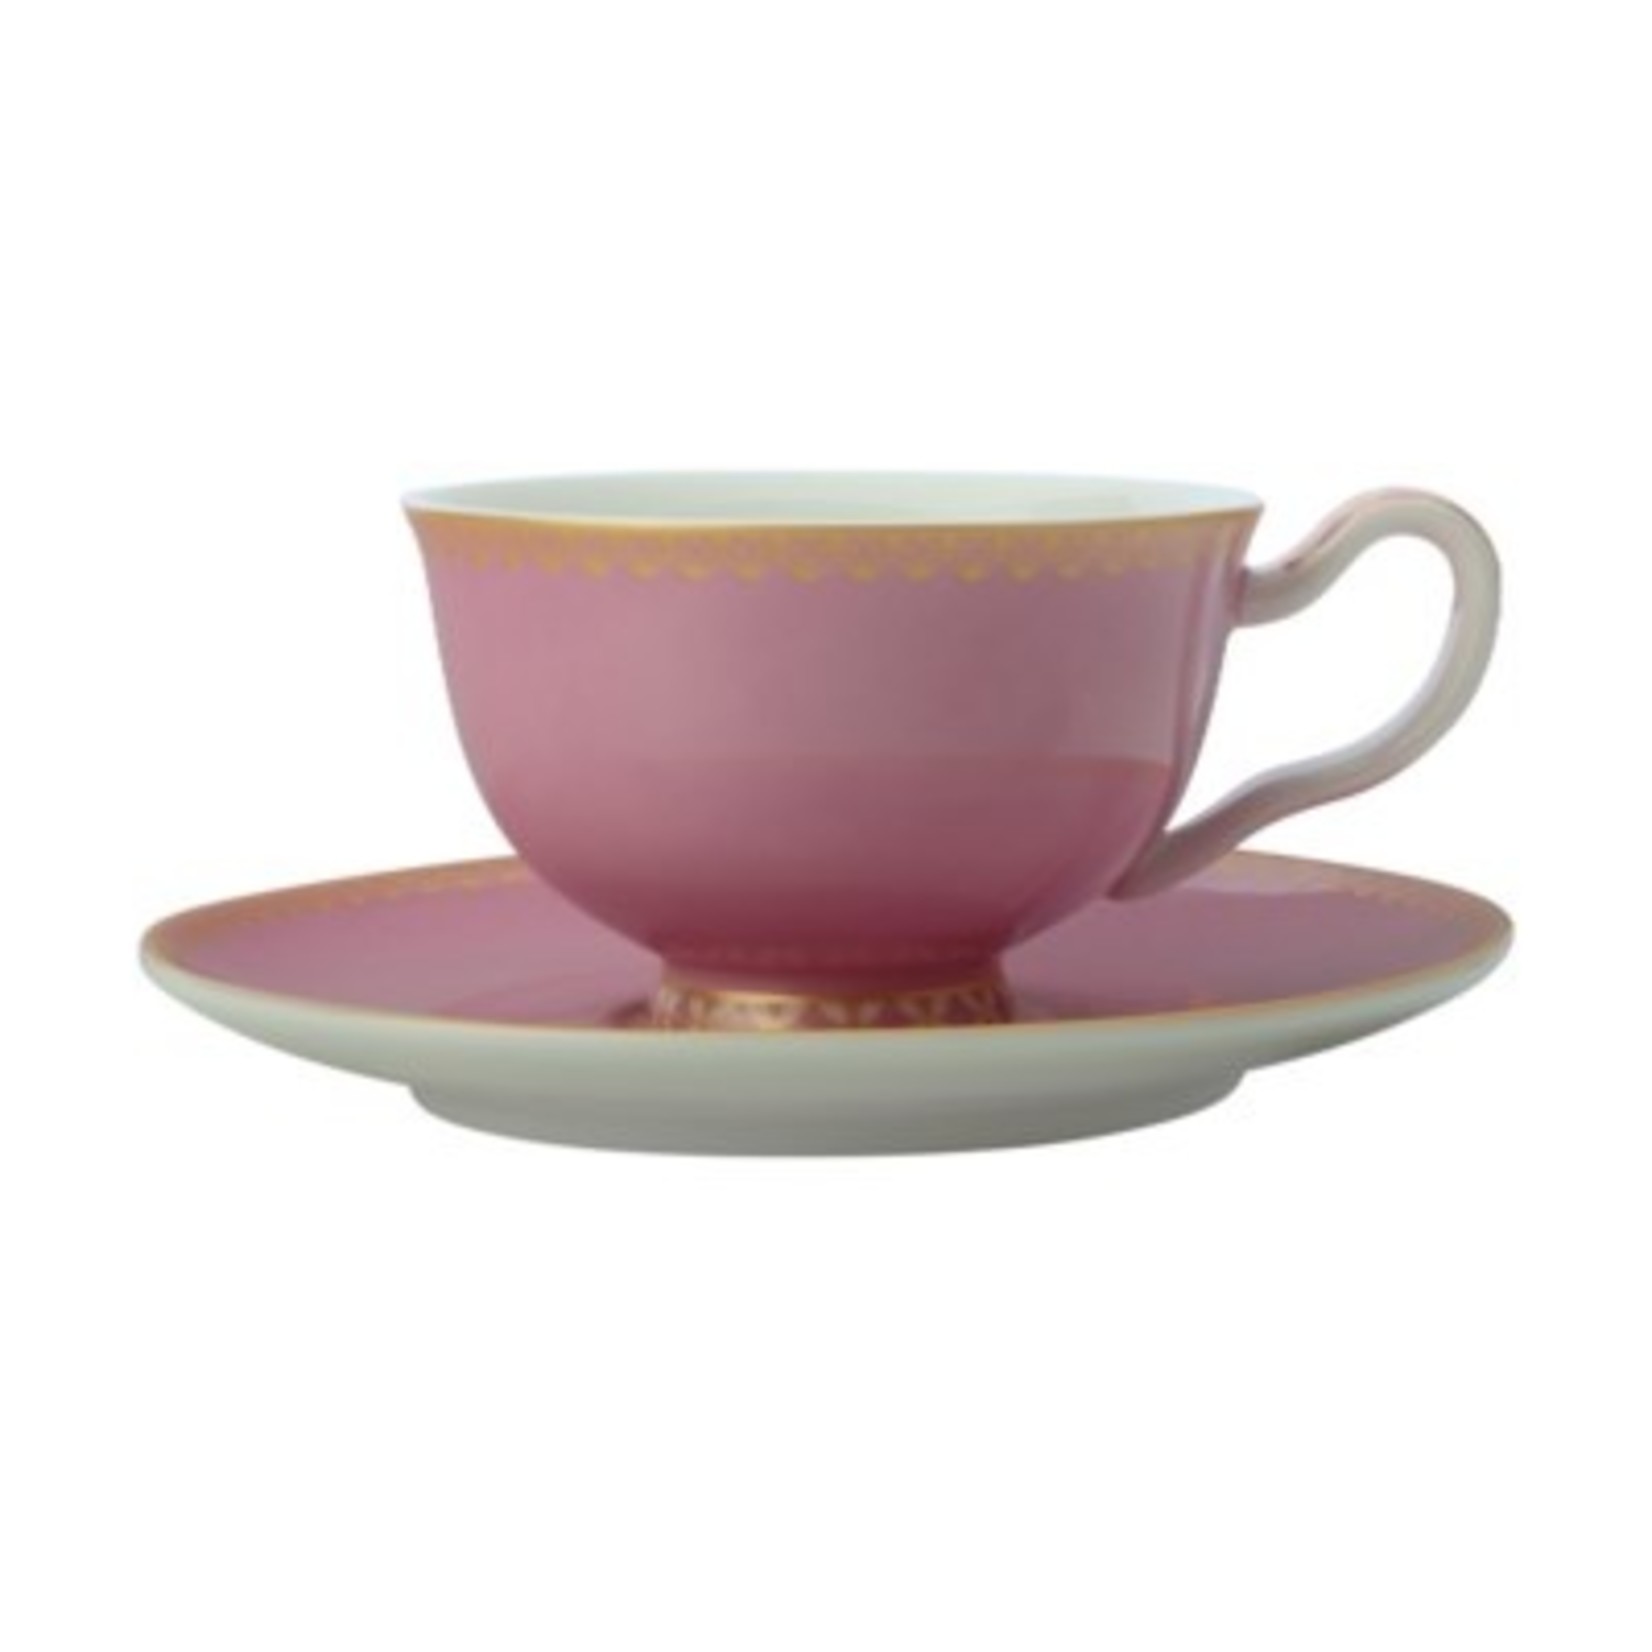 MAXWELL WILLIAMS MAXWELL WILLIAMS Classic Cup & Saucer - Pink DNR